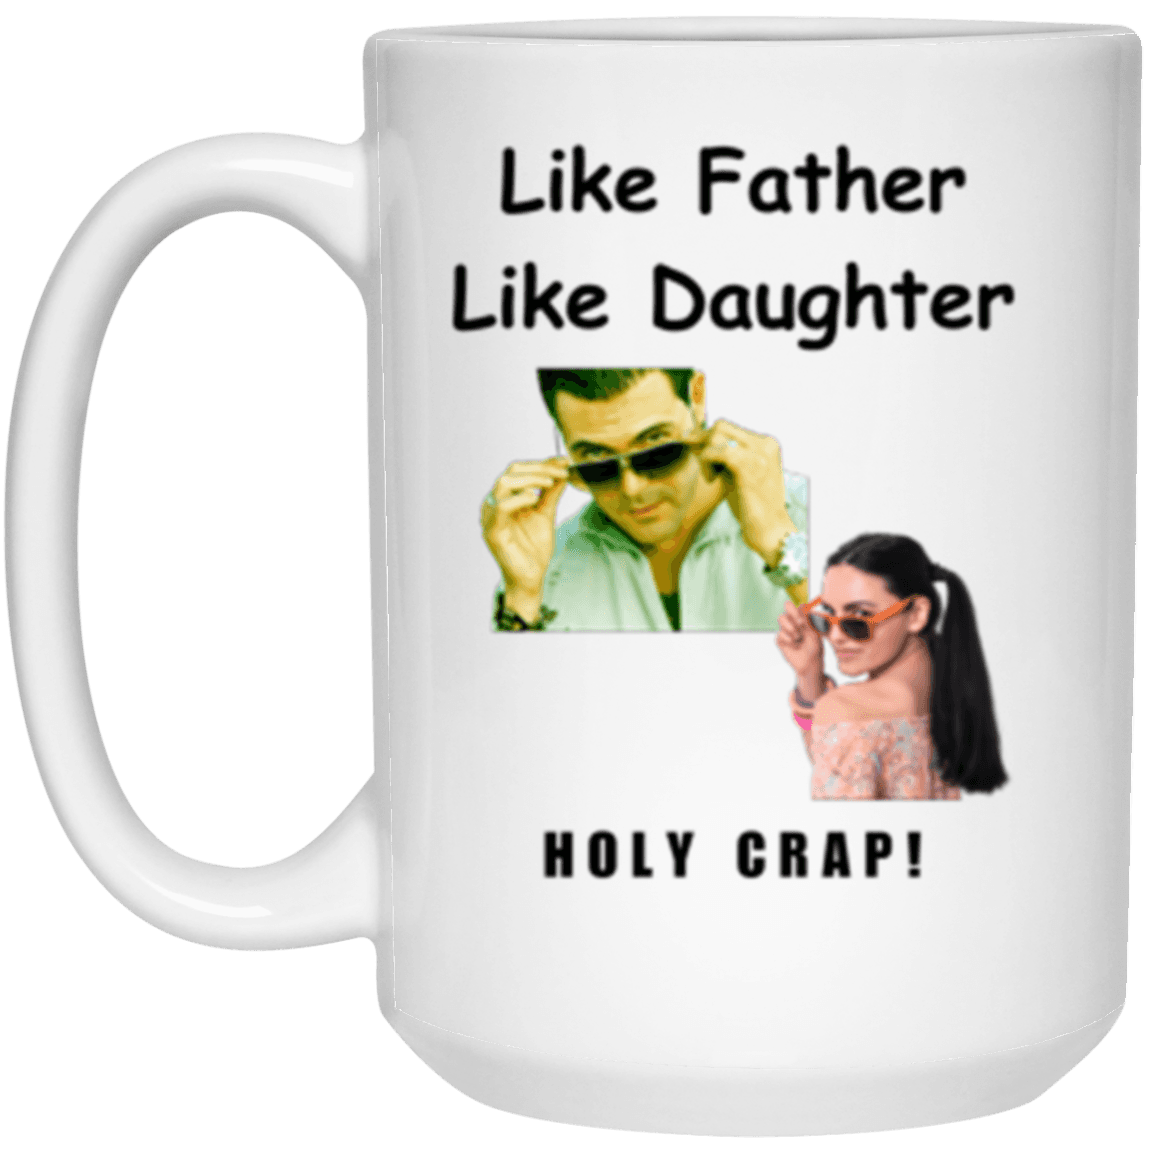 15oz high-quality white gloss ceramic mug. On the front are images of a middle-aged man peering over his glasses and a young woman doing the same while looking back over her shoulder. The printed text reads: Like father, like daughter. Holy crap! 